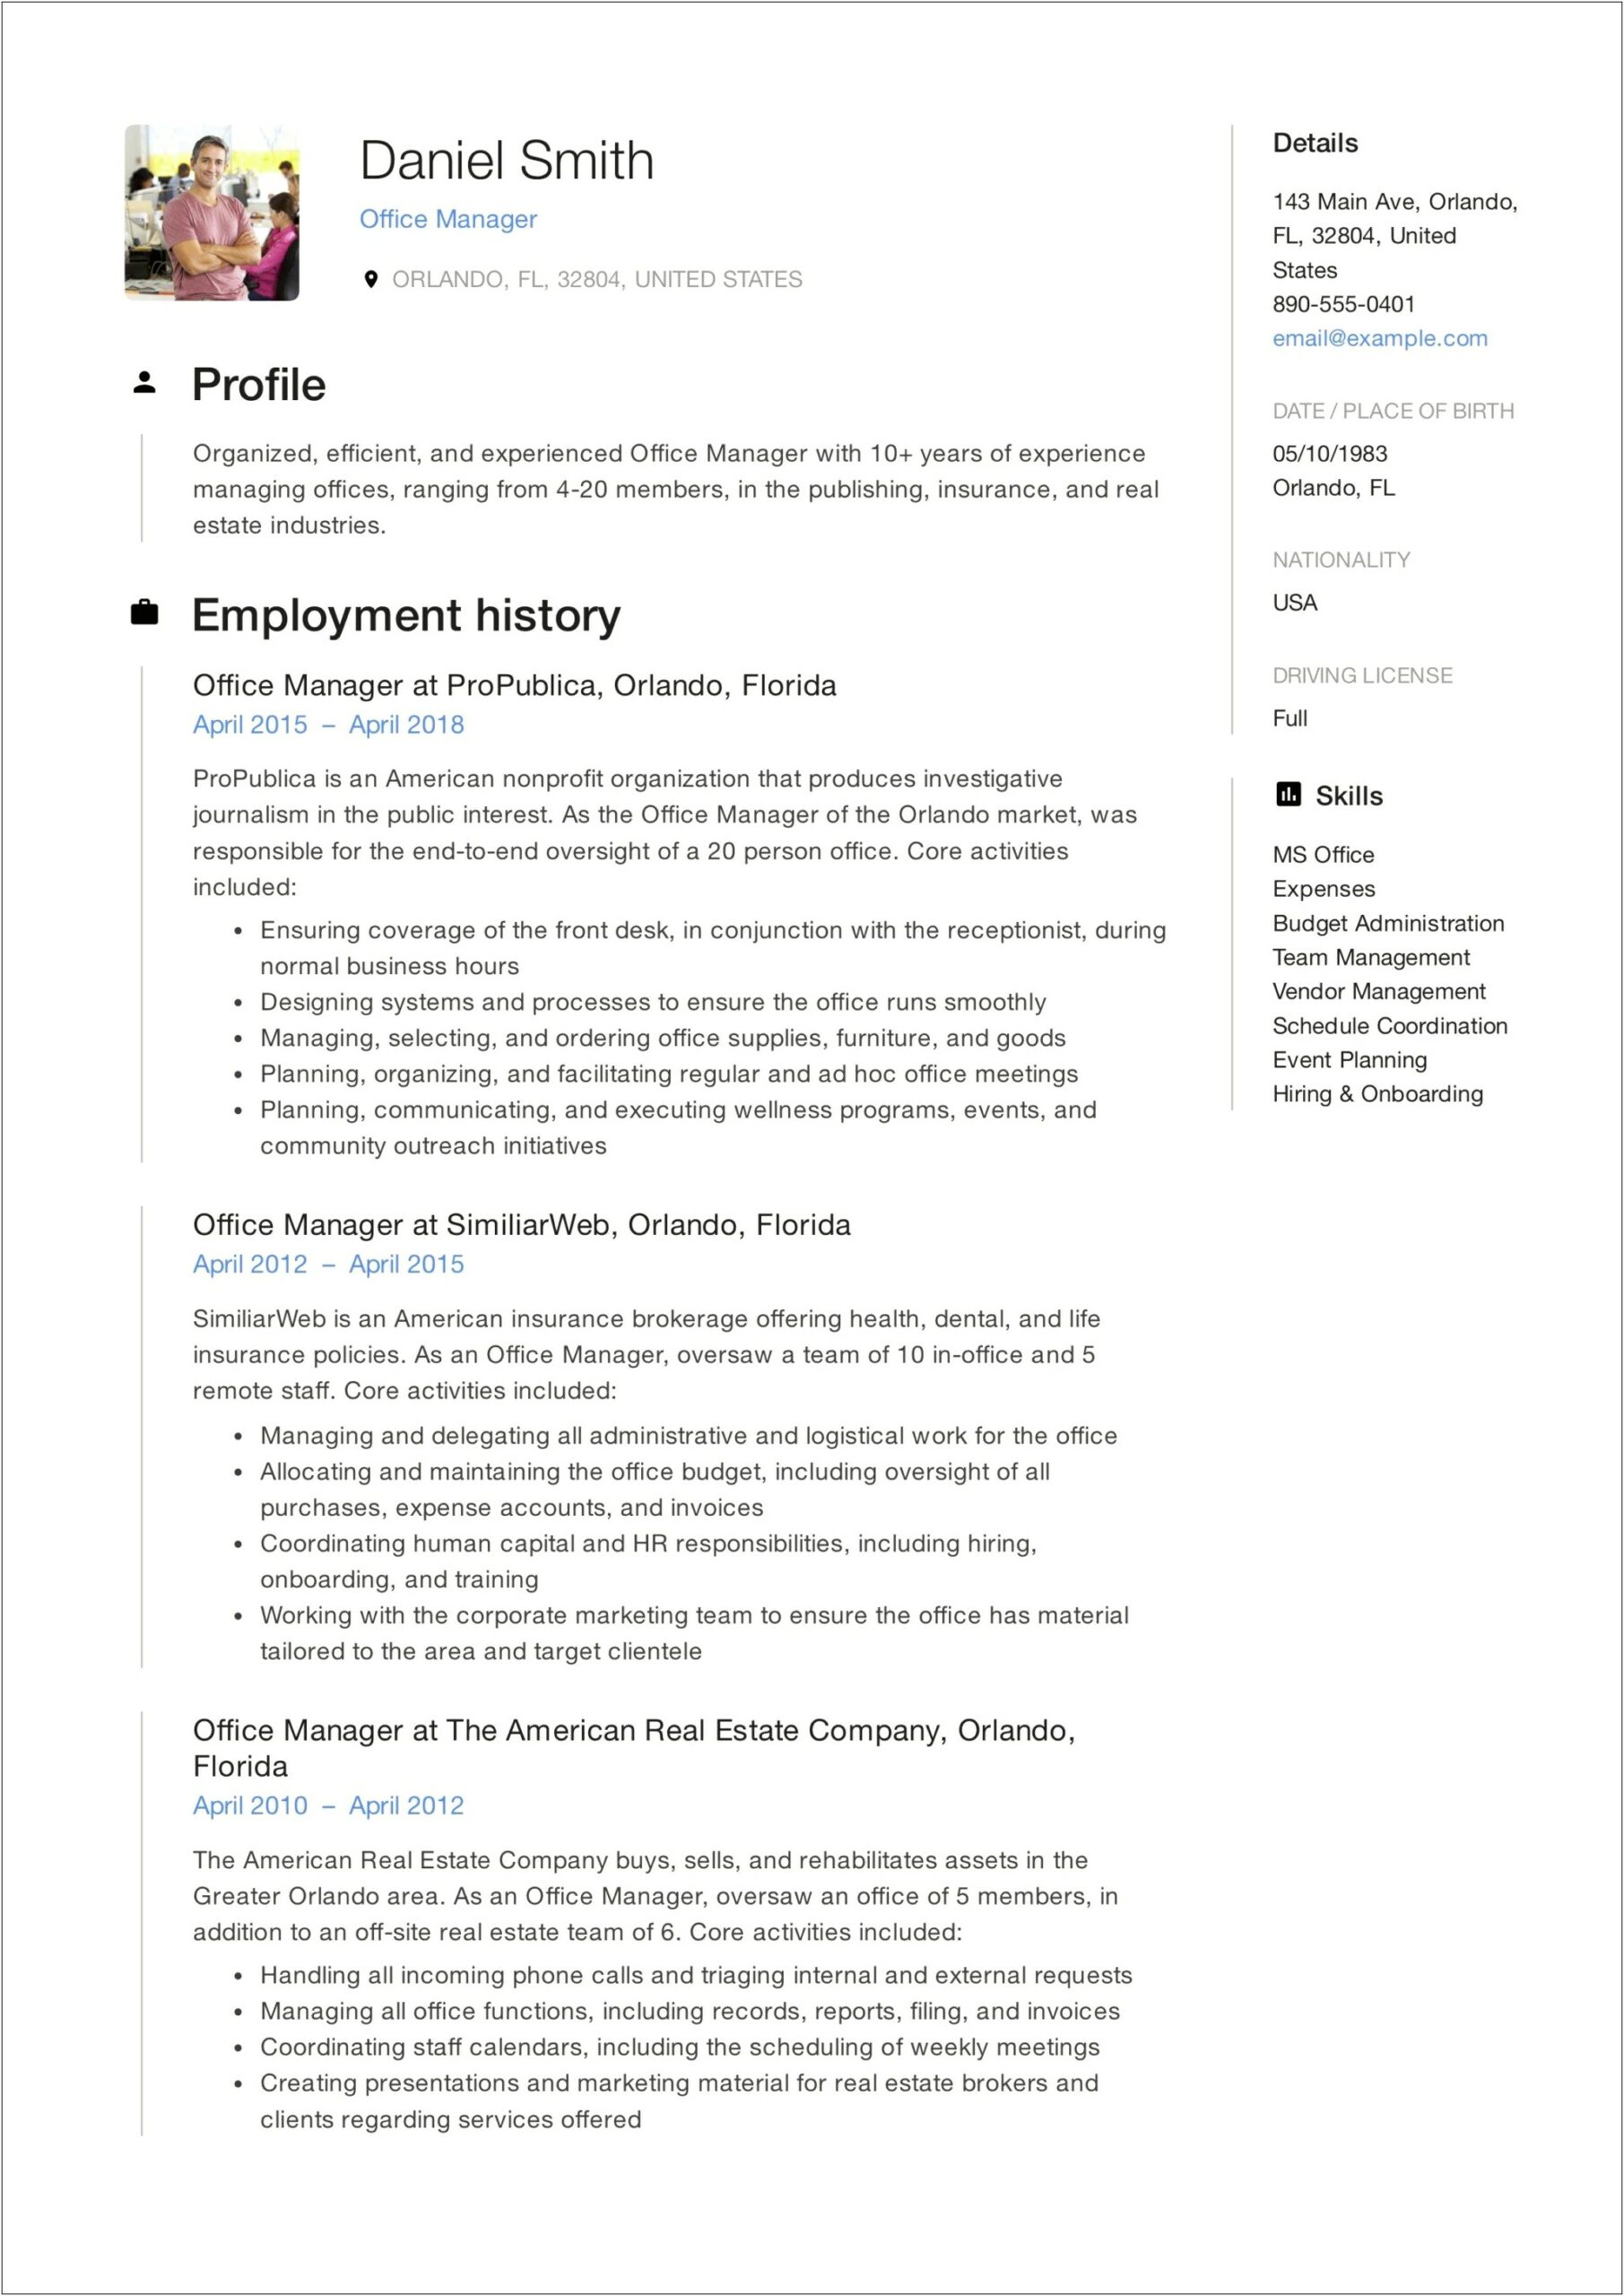 Resume Summary Statement For Office Manager